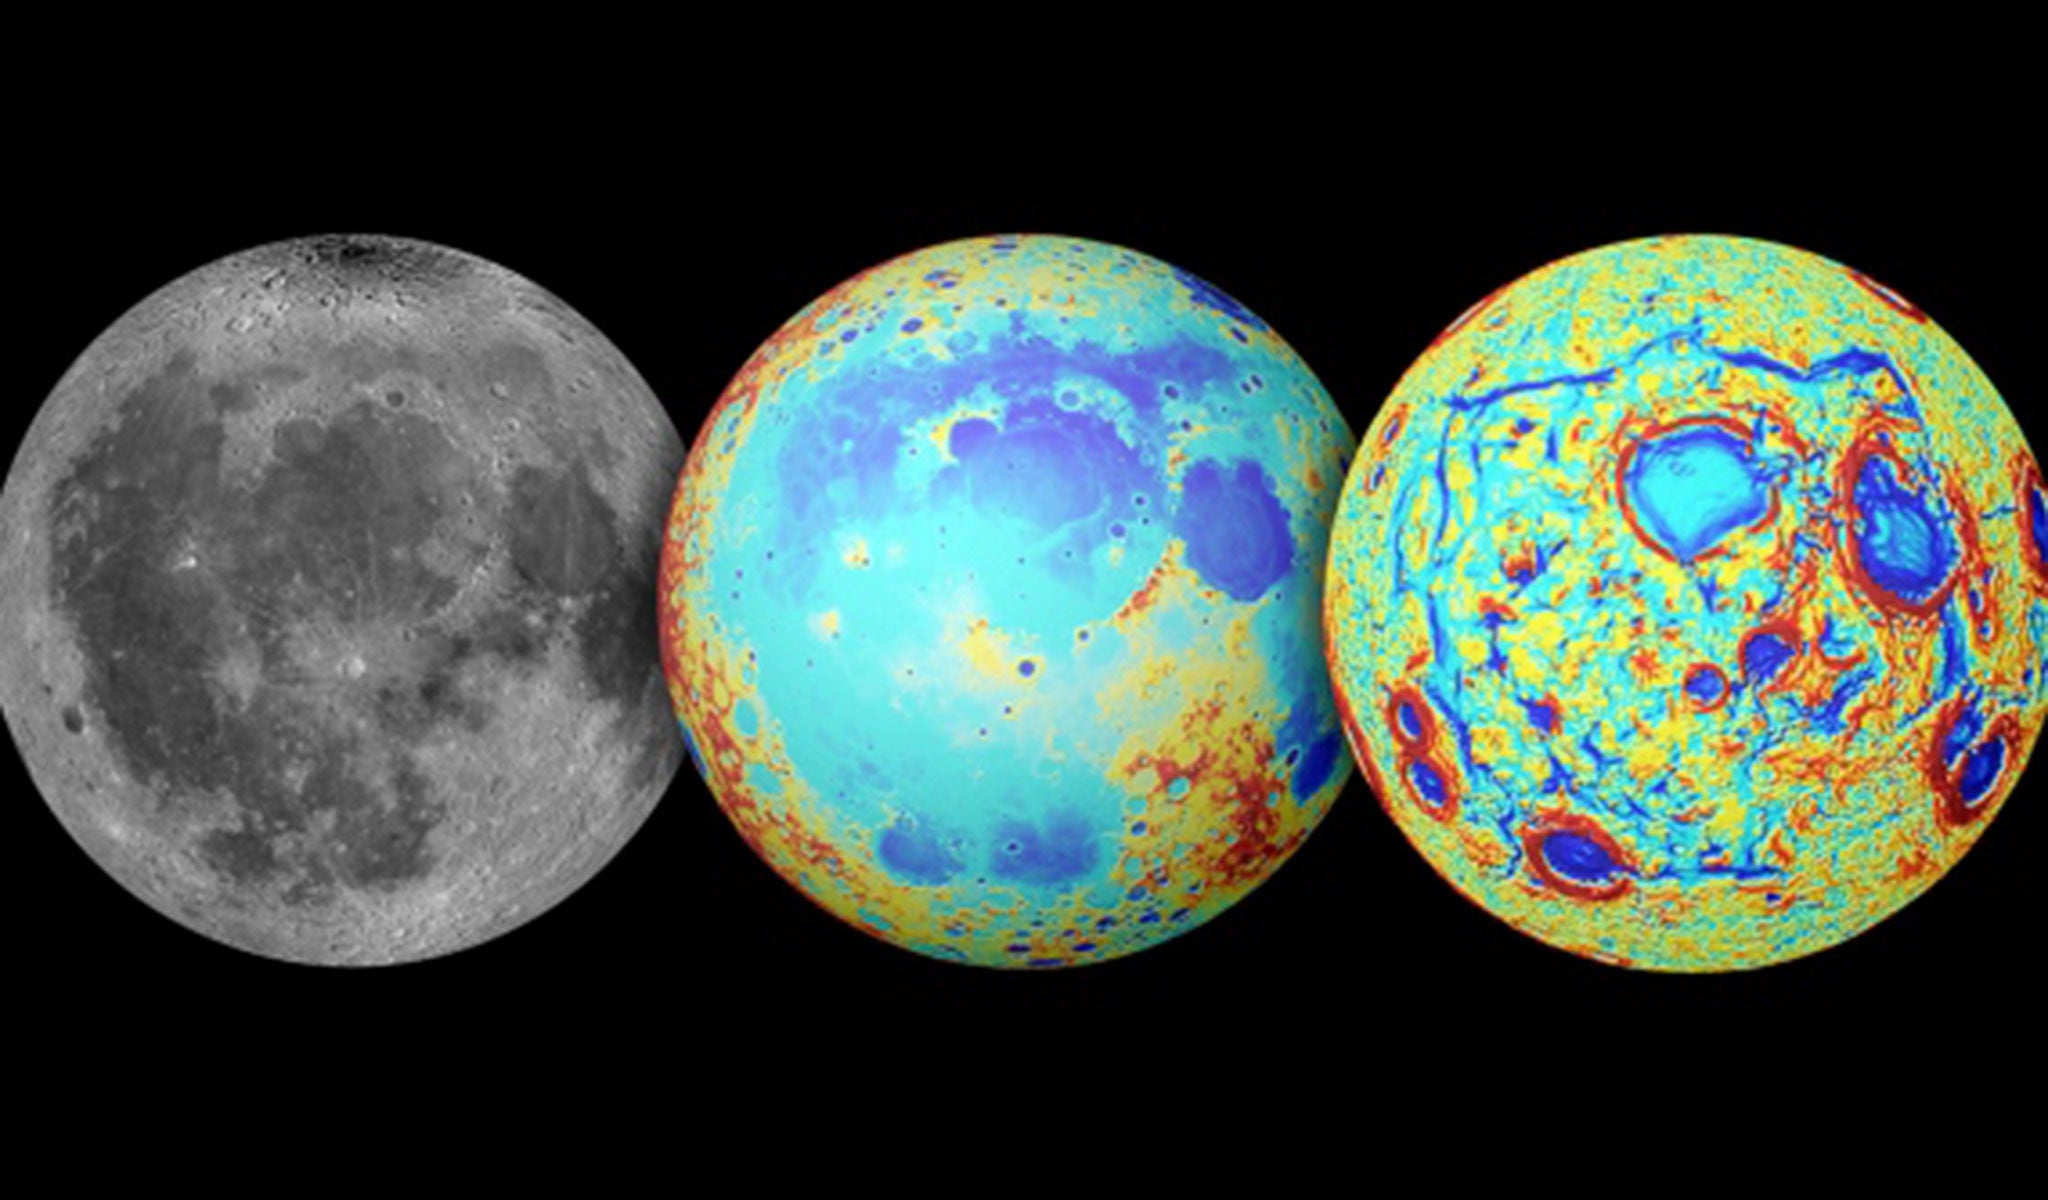 The moon observed in visible light, topography and the GRAIL gravity gradients